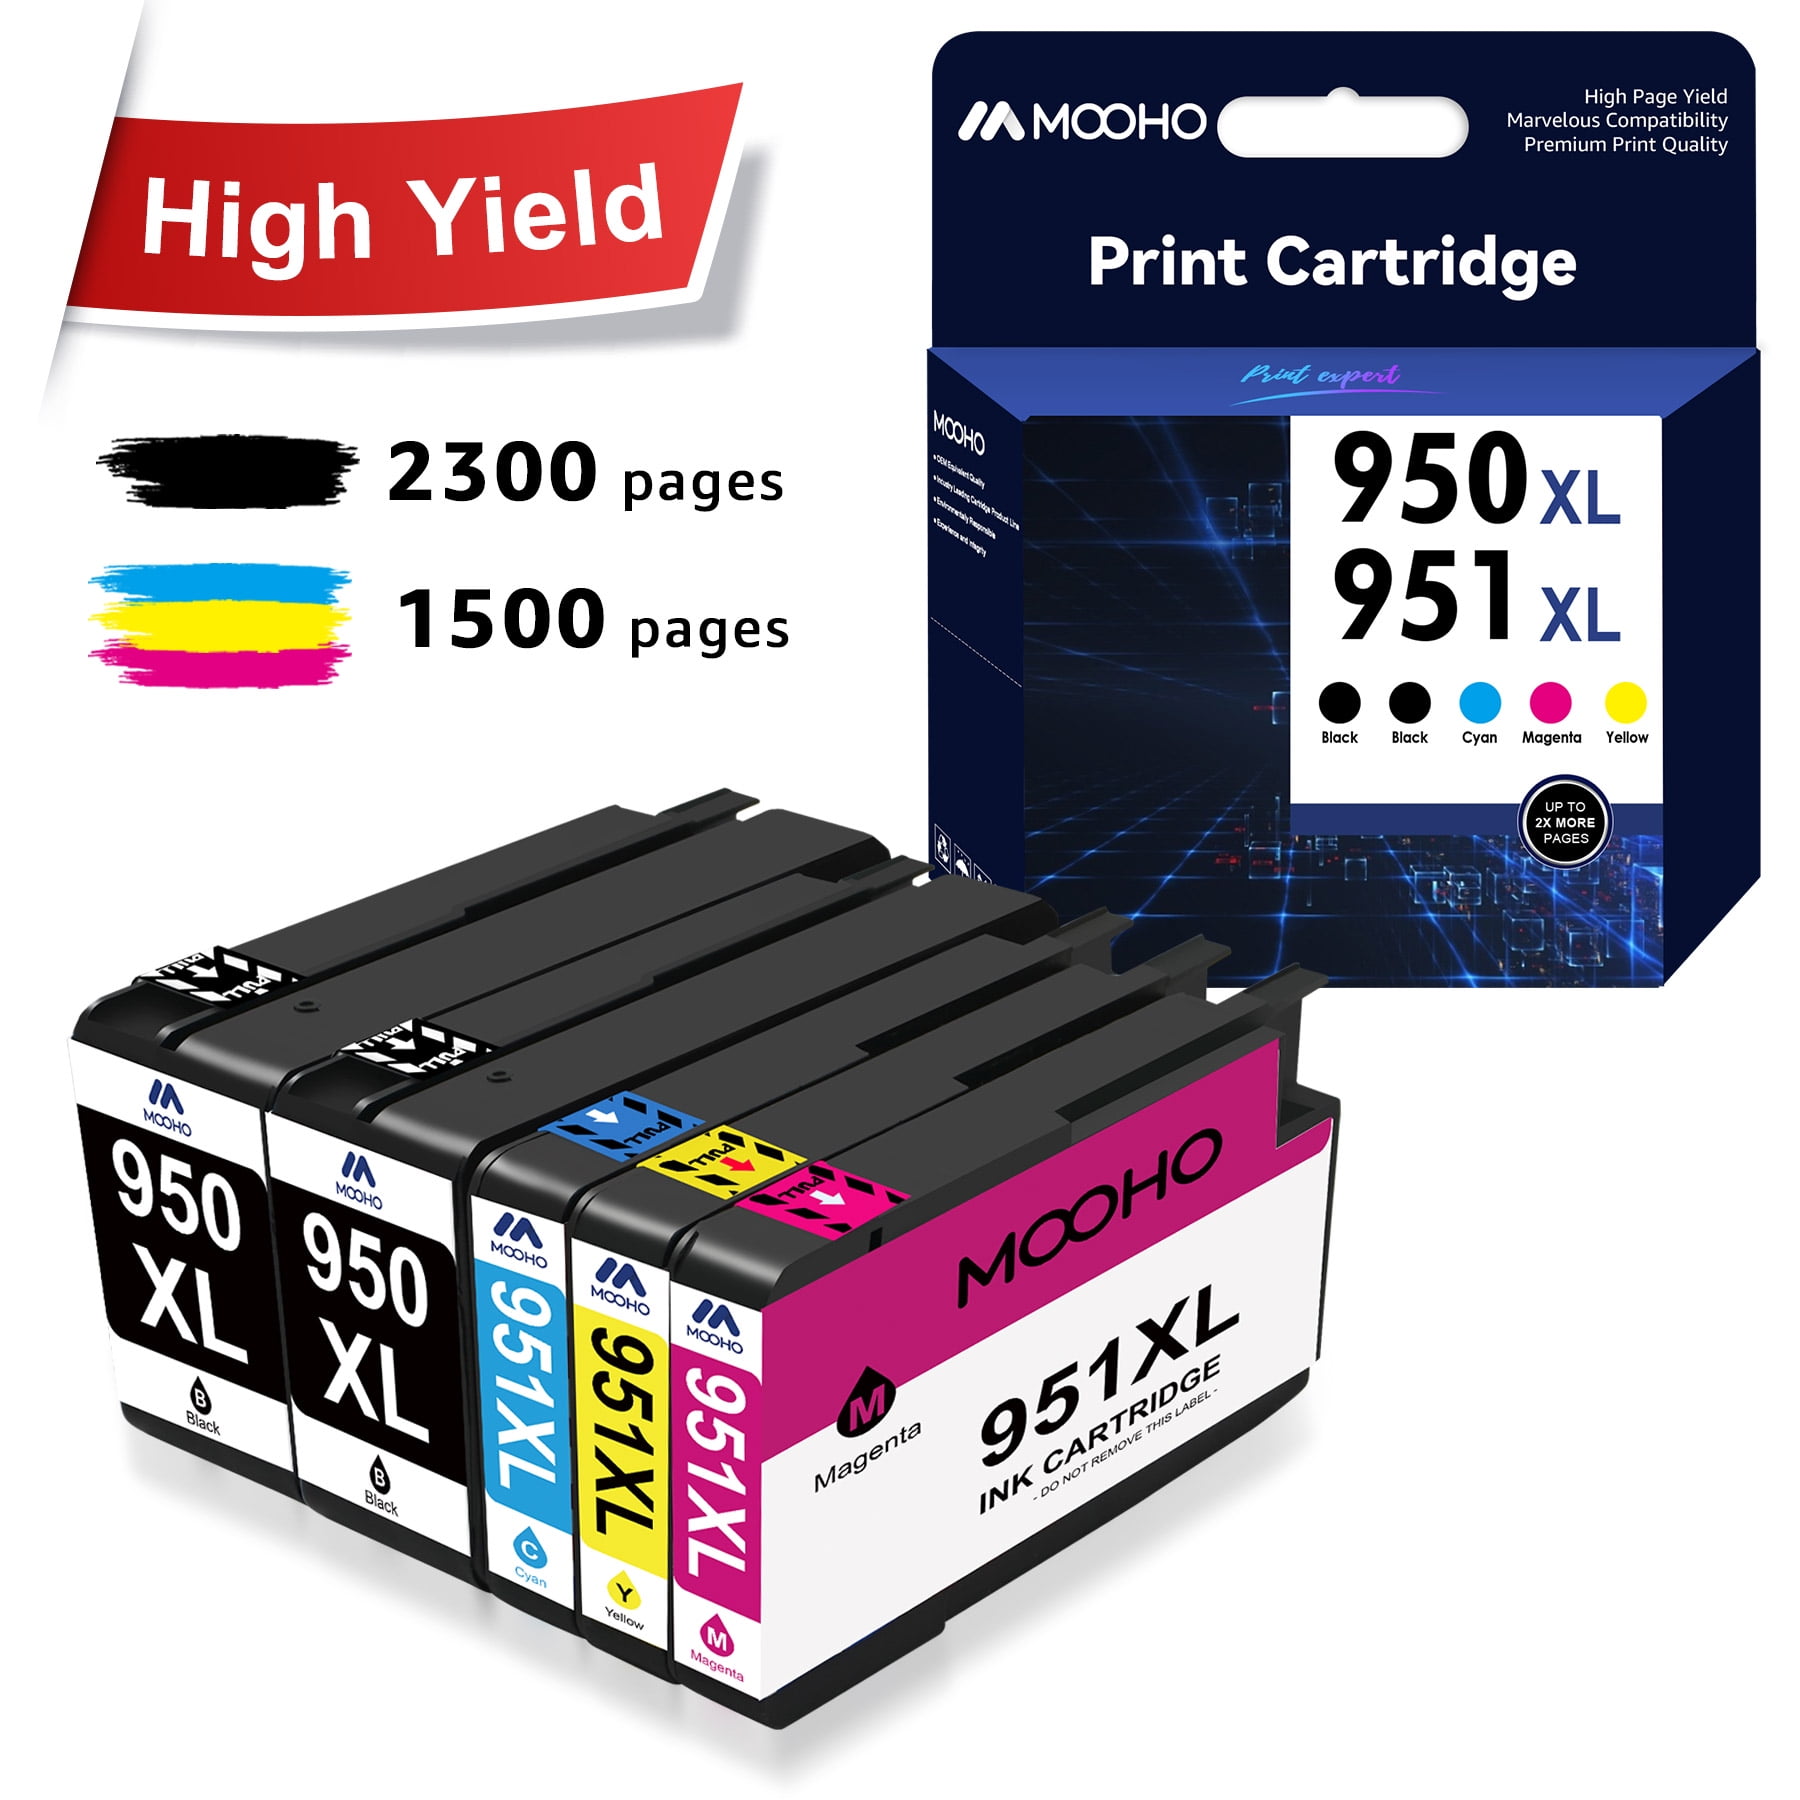 Smart Ink Compatible Ink Cartridge Replacement for HP 950XL 951XL 950 XL  951 XL 5 Pack Combo to use with Officejet Pro 8600 plus 8610 8620 8100 8625